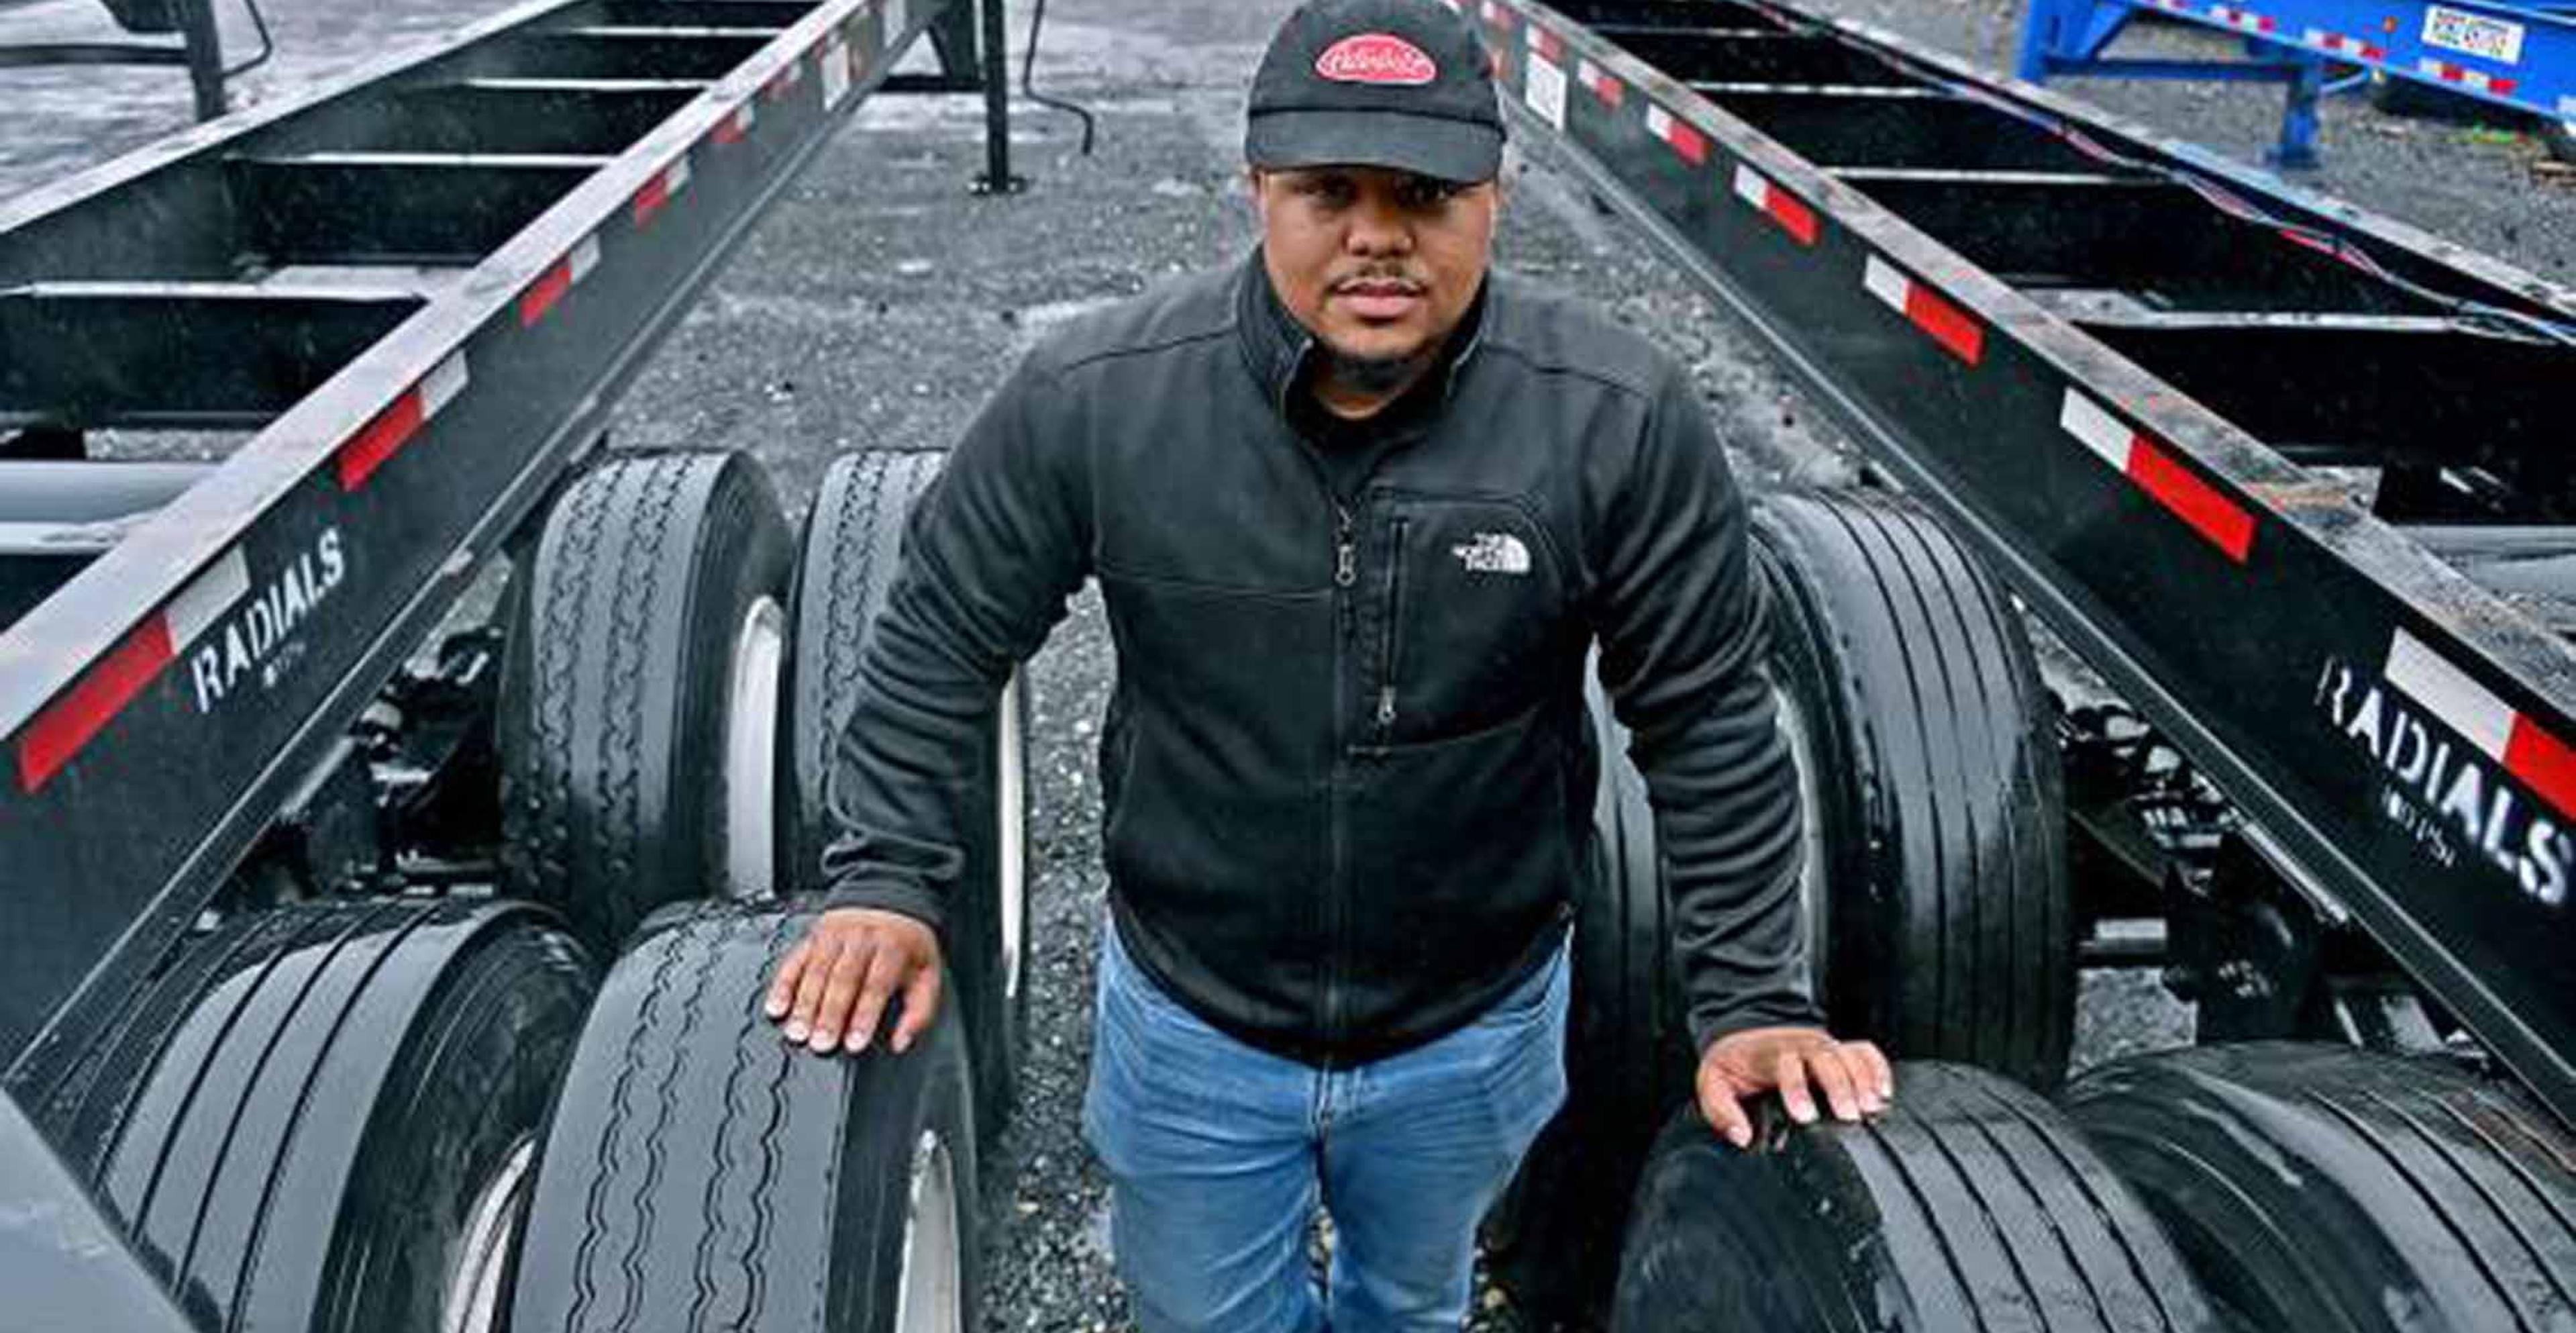 Truck driver standing in between the tires of a semi-truck.